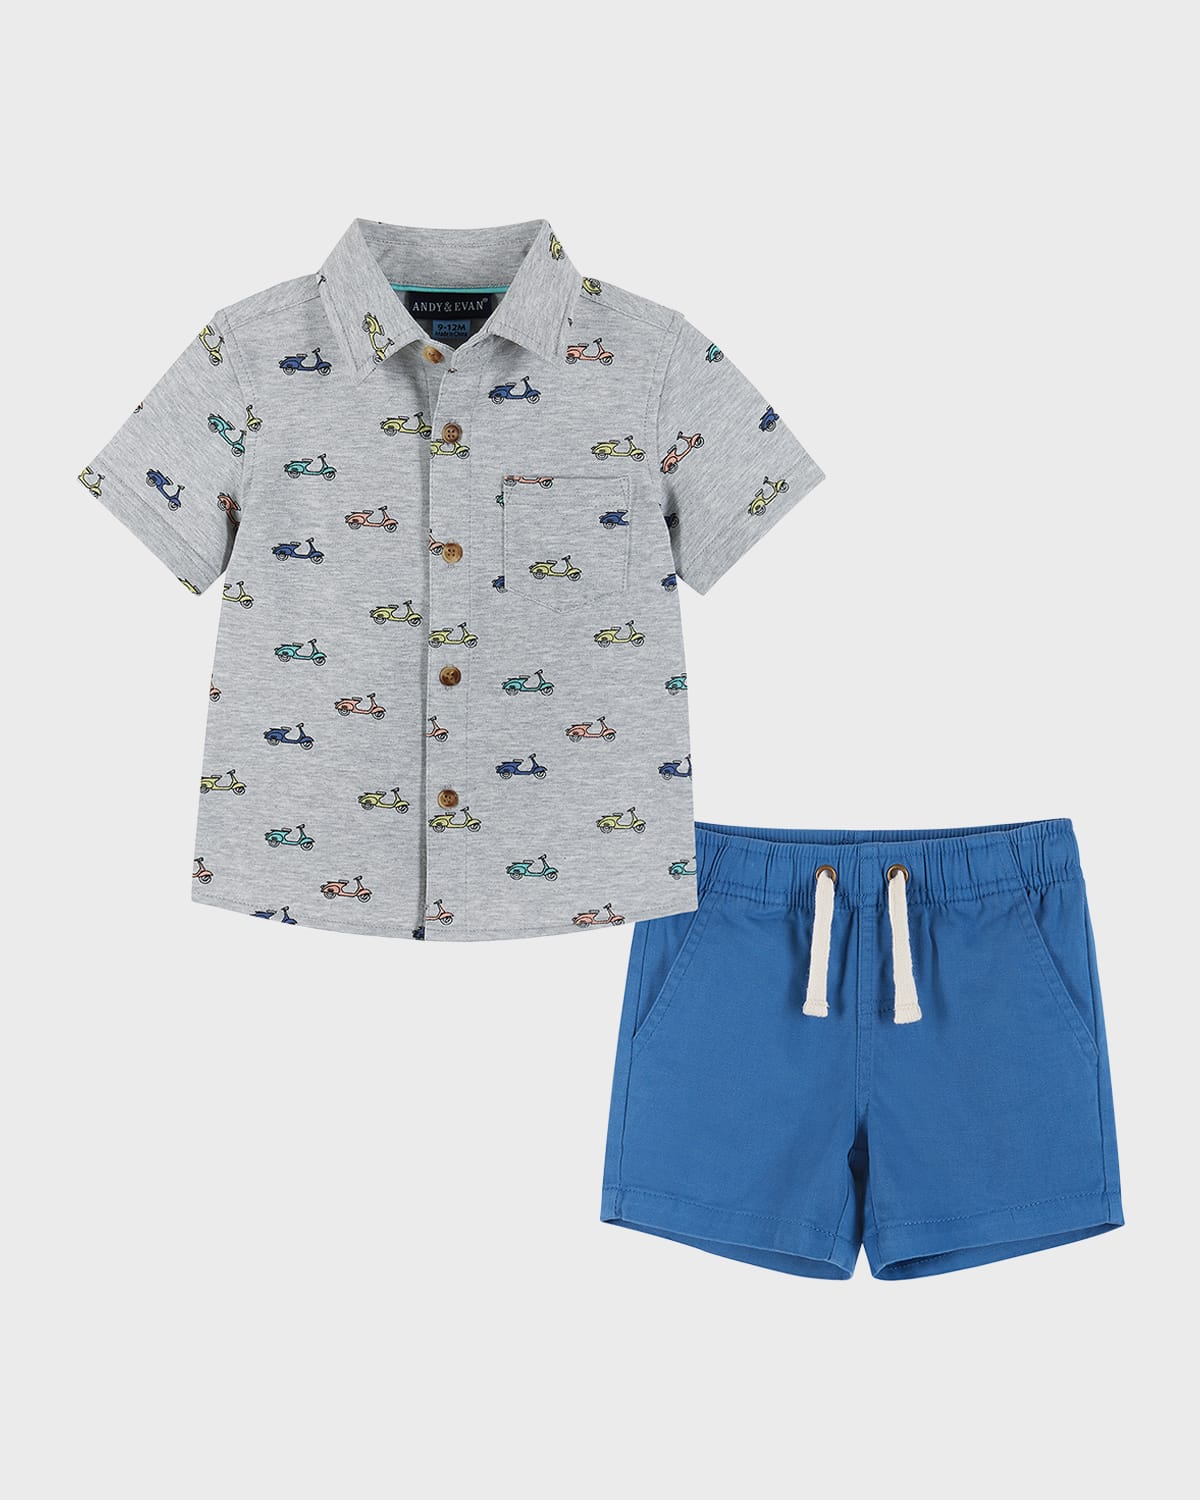 Andy & Evan Kids' Boy's Polo Shirt & Shorts Set In Grey Scooter